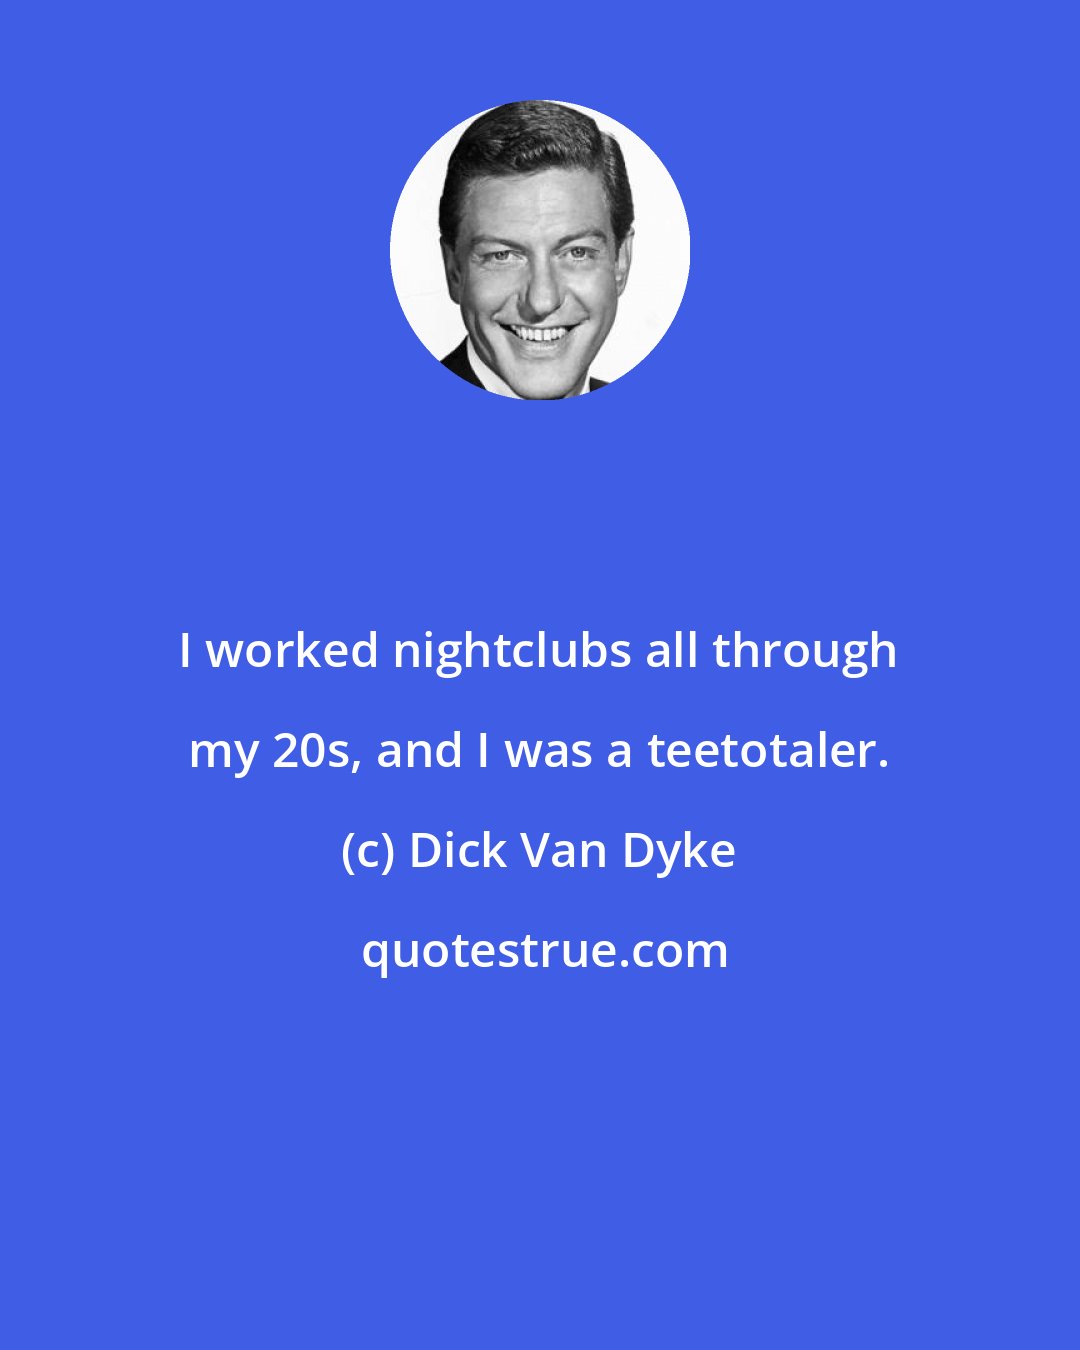 Dick Van Dyke: I worked nightclubs all through my 20s, and I was a teetotaler.